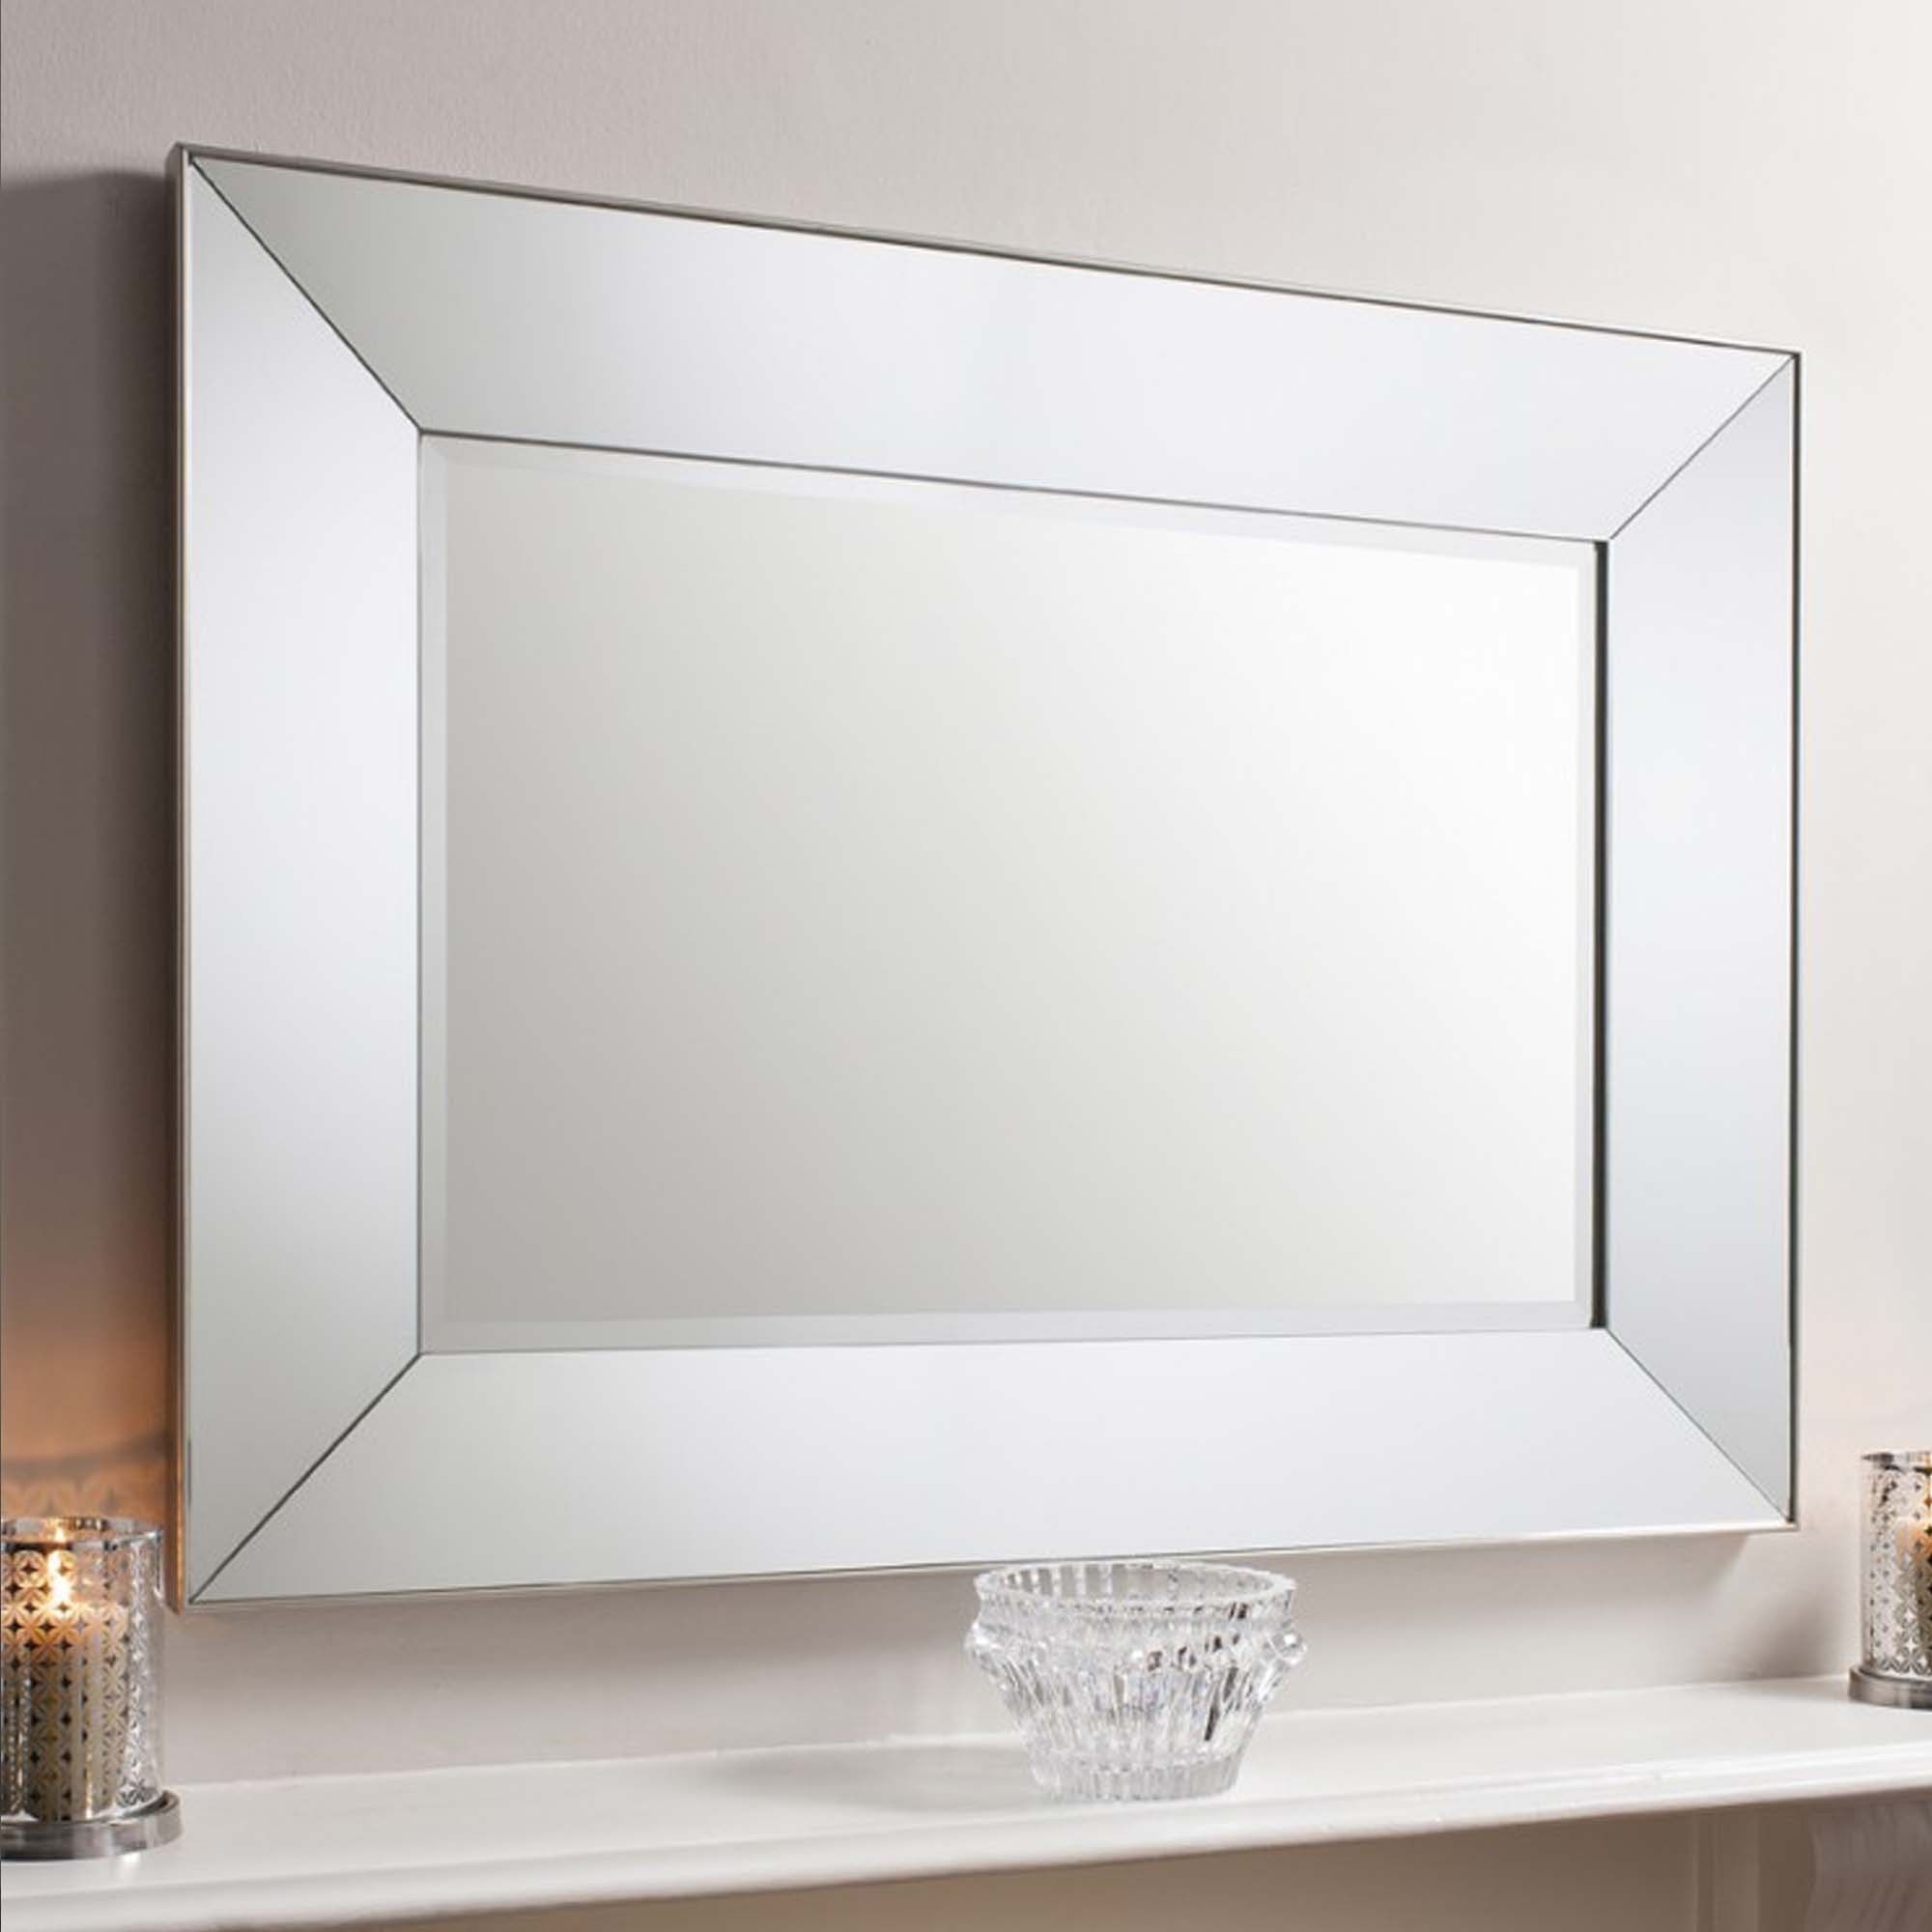 Vasto Rectangle Mirror Silver | Wall Mirror | Decorative Mirrors With Regard To Square Oversized Wall Mirrors (View 3 of 15)